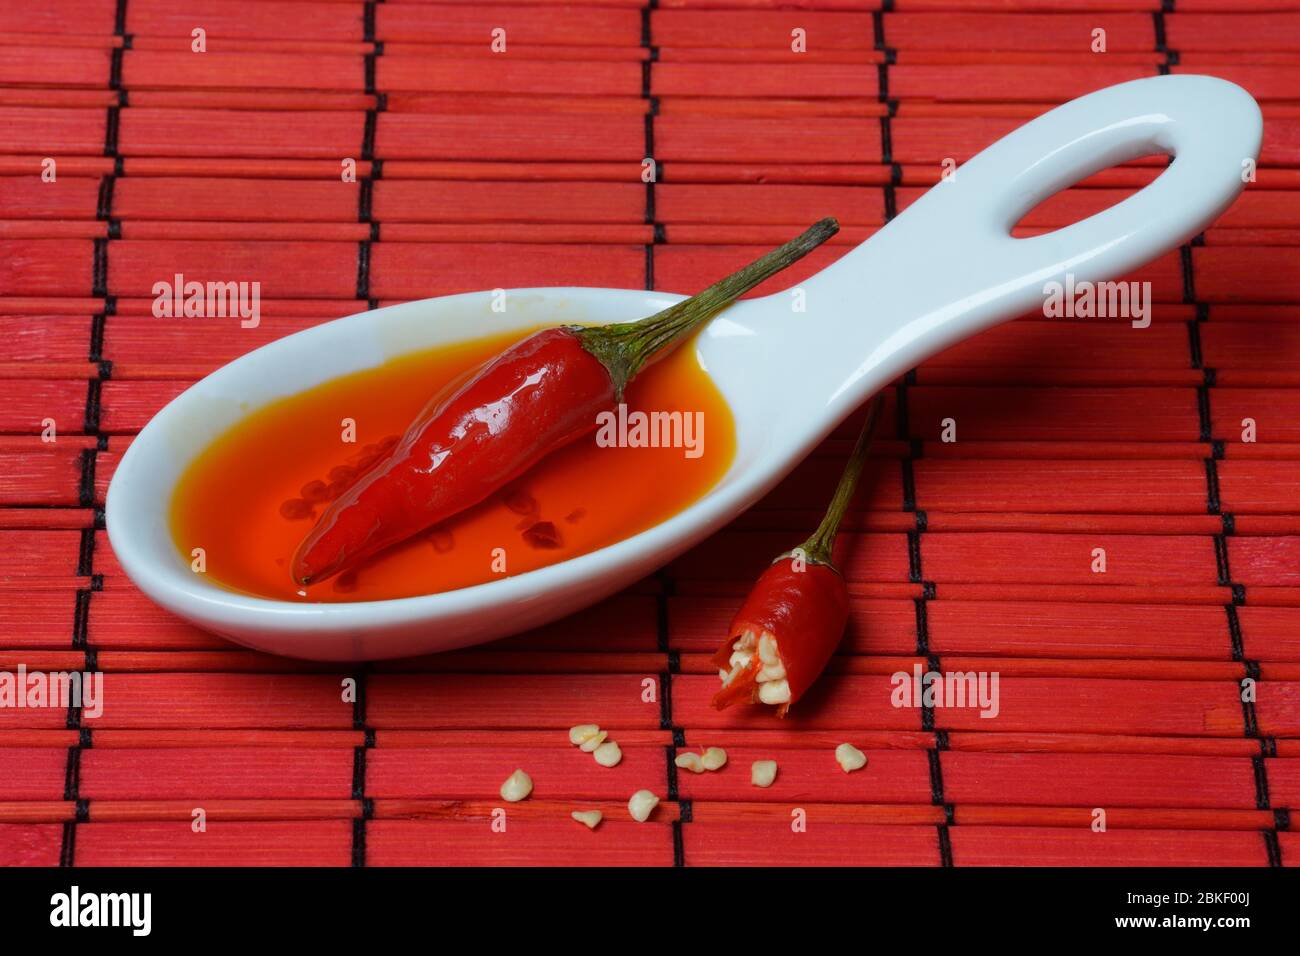 Chilli oil and chilli pepper in ceramic bowls, food photography, studio shot, Germany Stock Photo